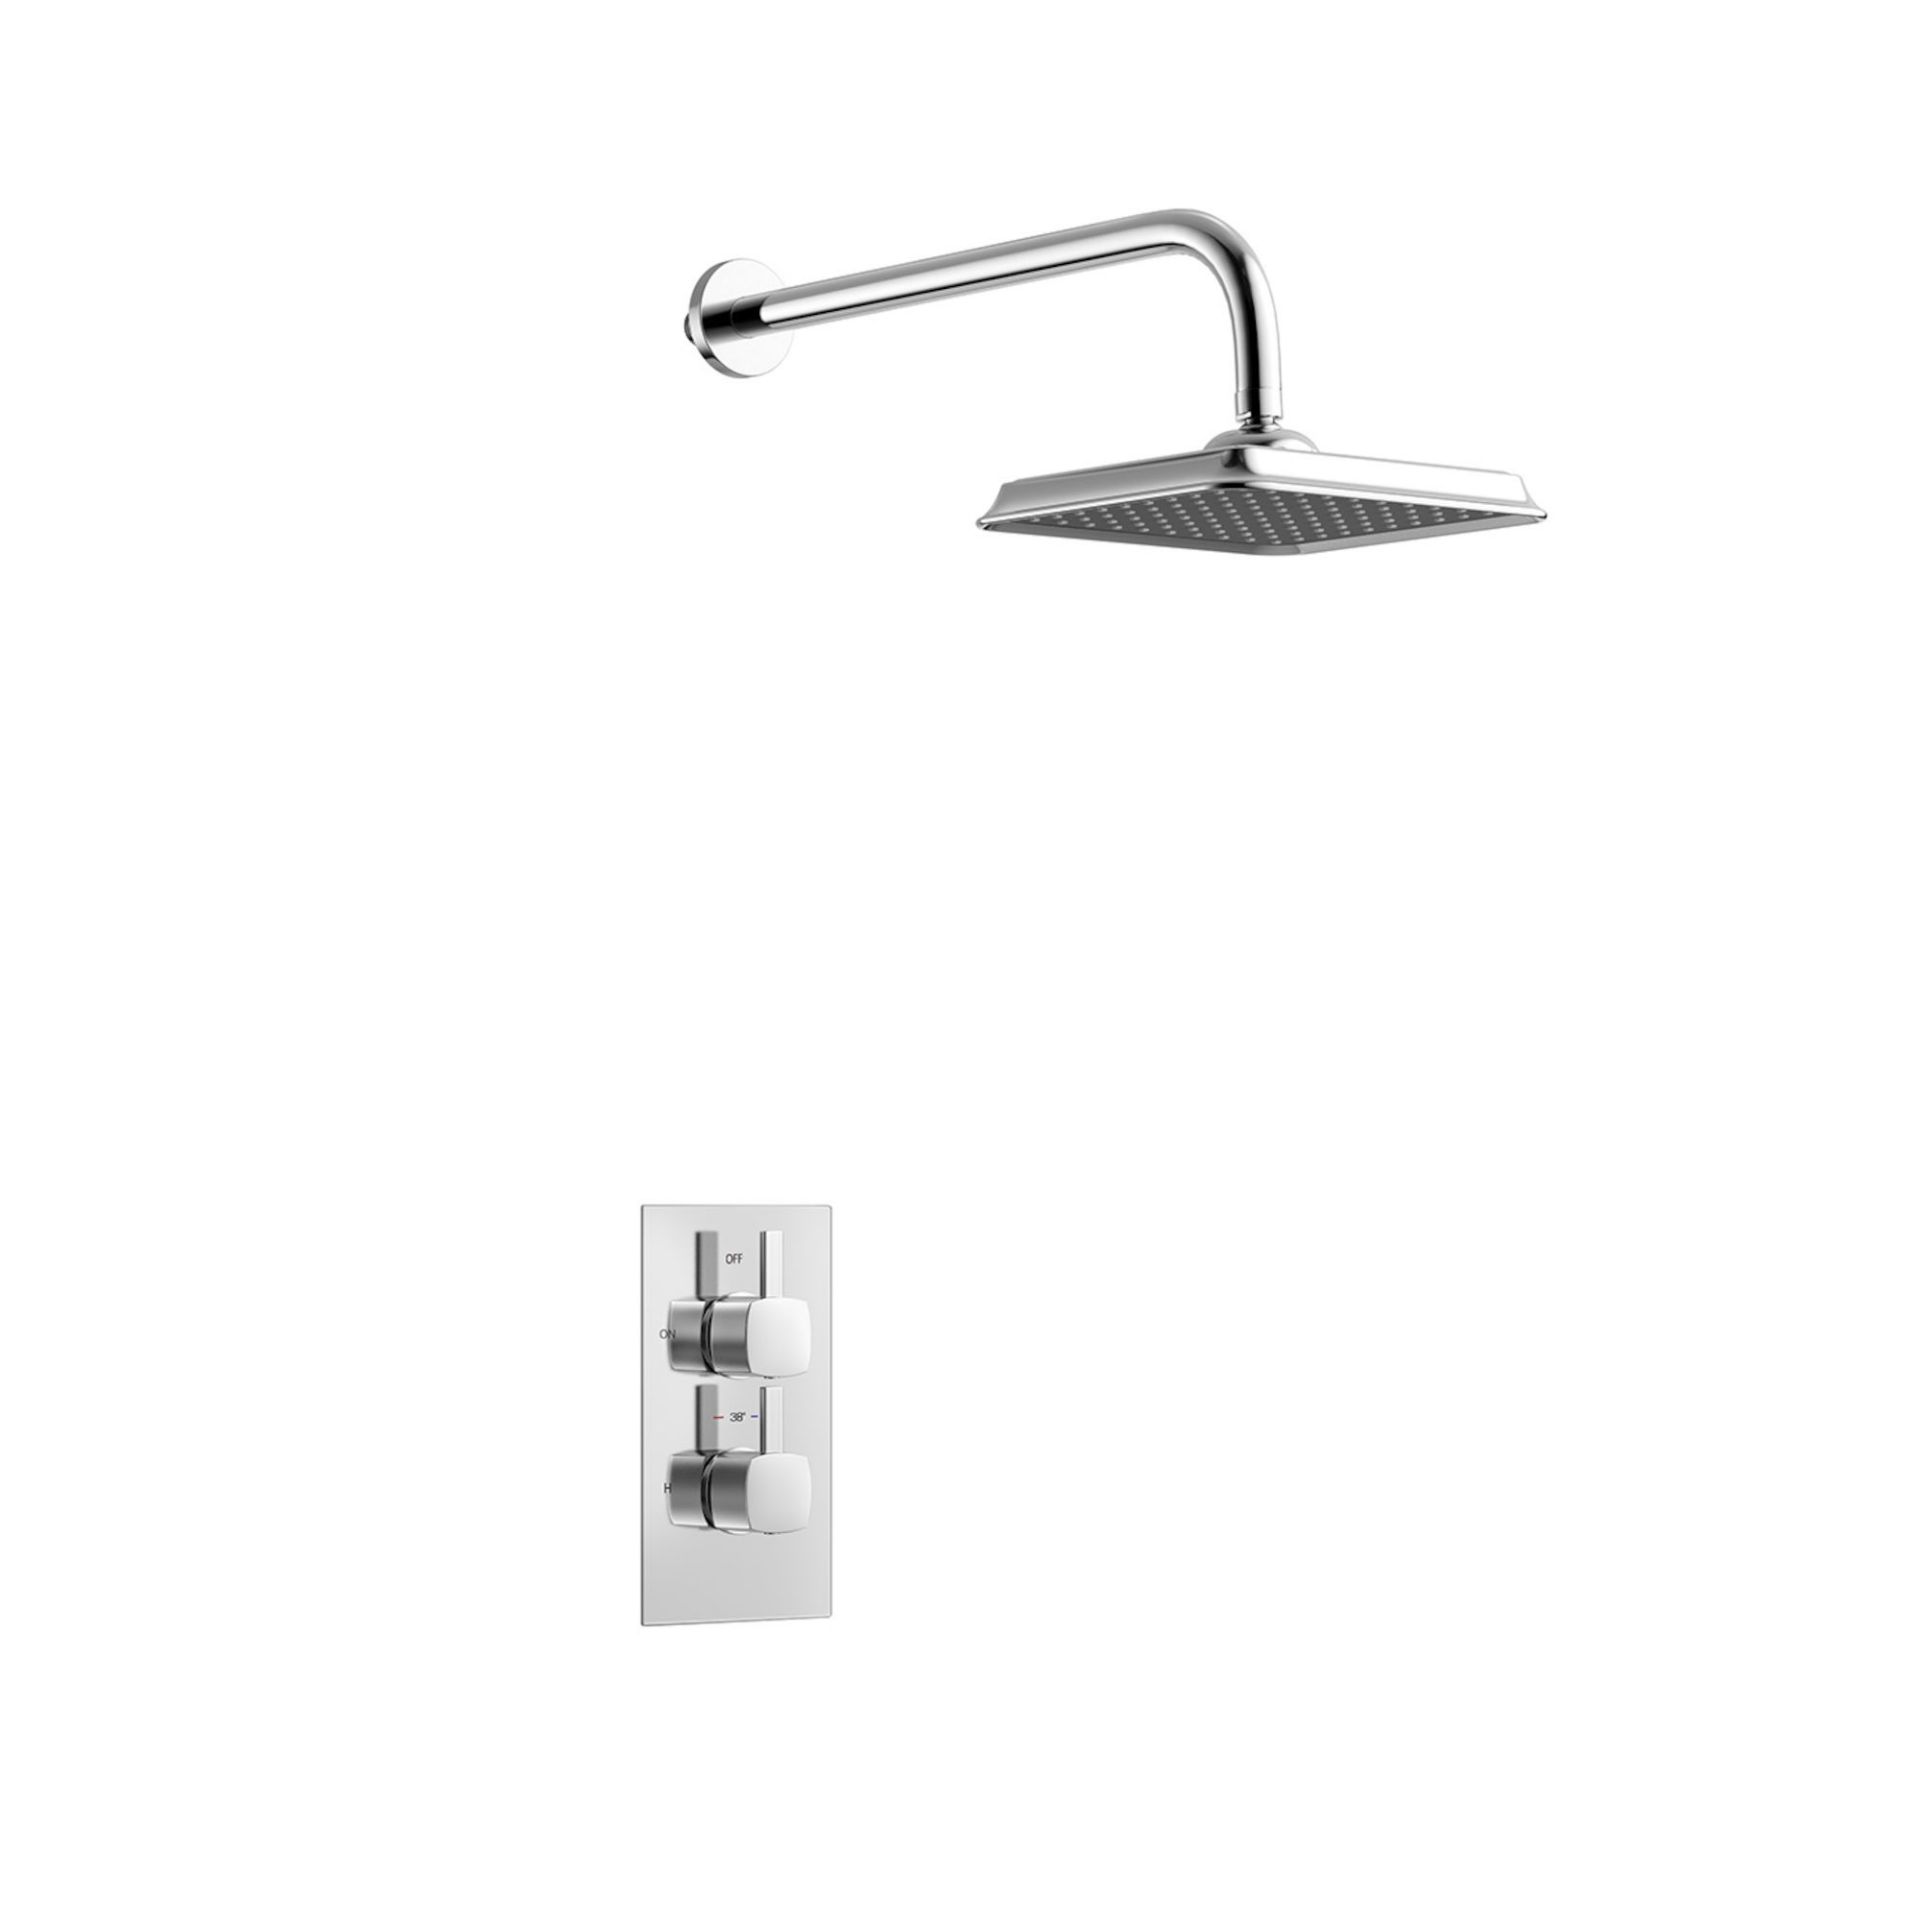 (DK50) Square Concealed Thermostatic Mixer Shower & Medium Head. Enjoy the minimalistic aesthetic of - Image 4 of 4